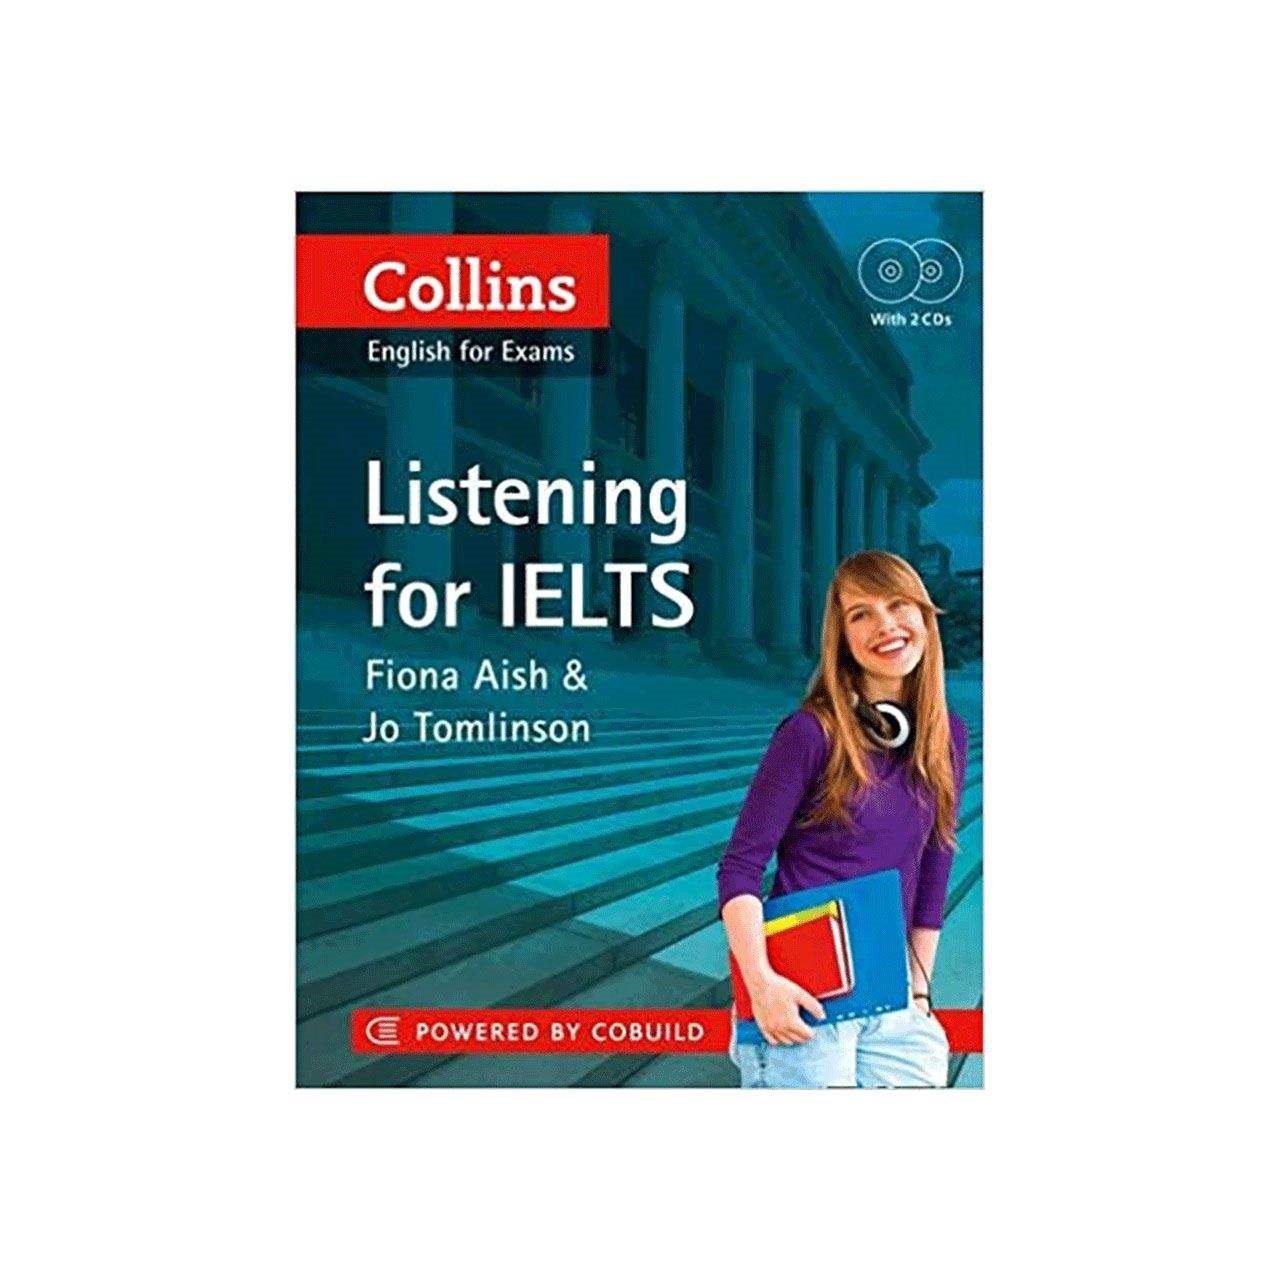 Collins English for Exams Listening for Ielts